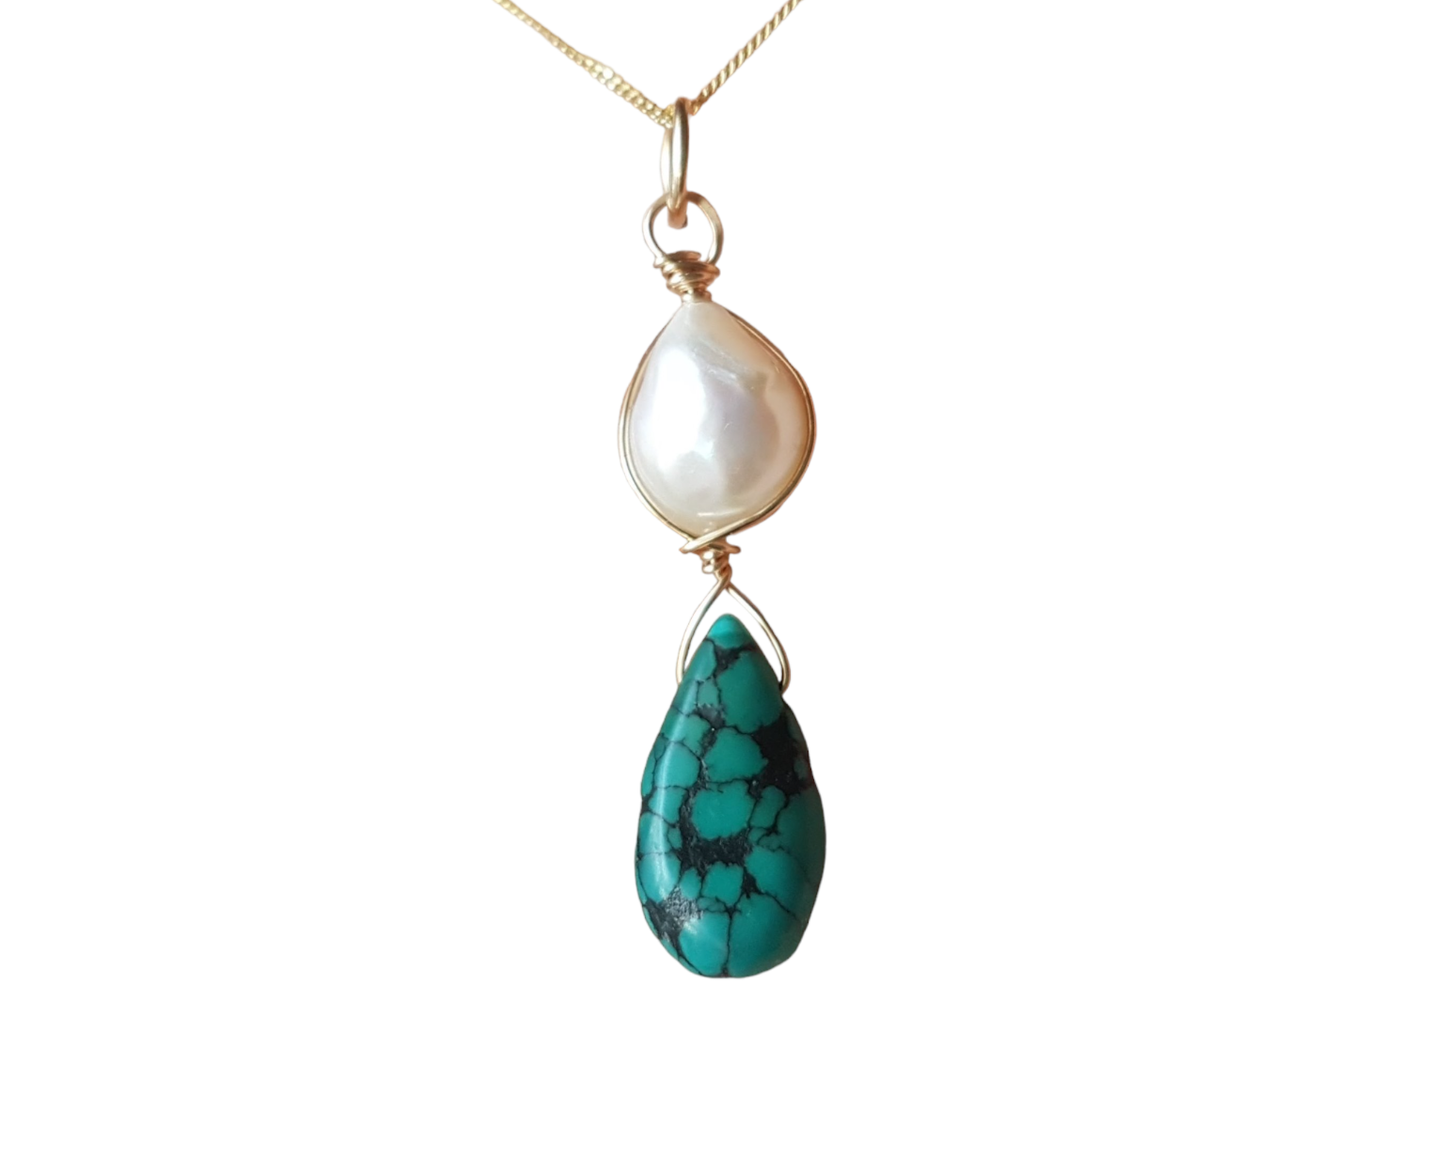 Baroque Pearl Turquoise Pendant with fine 14k Gold Filled curb chain, a Large White Freshwater Cultured Pearl and Turquoise drop shaped stone, wire wrapped with Gold Filled wire. 